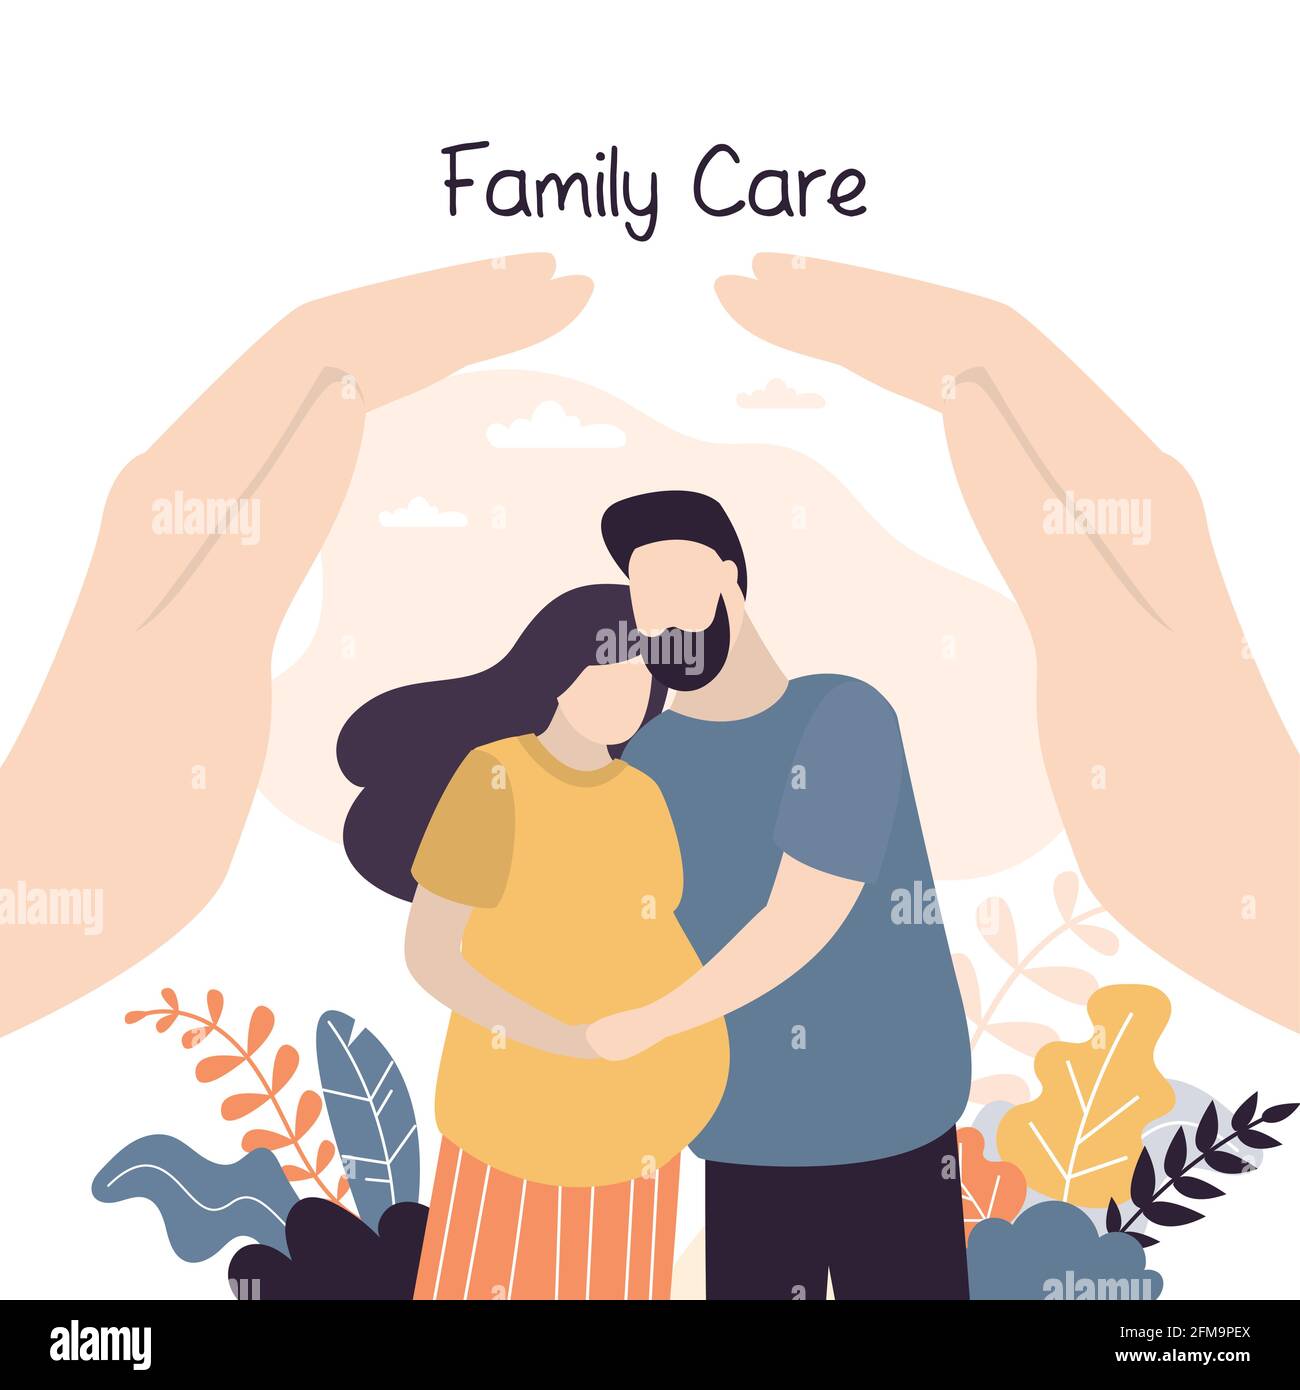 Insurance and healthcare concept background. Big hands covering tiny young love couple with care.Medical or financial assurance,family care banner tem Stock Vector